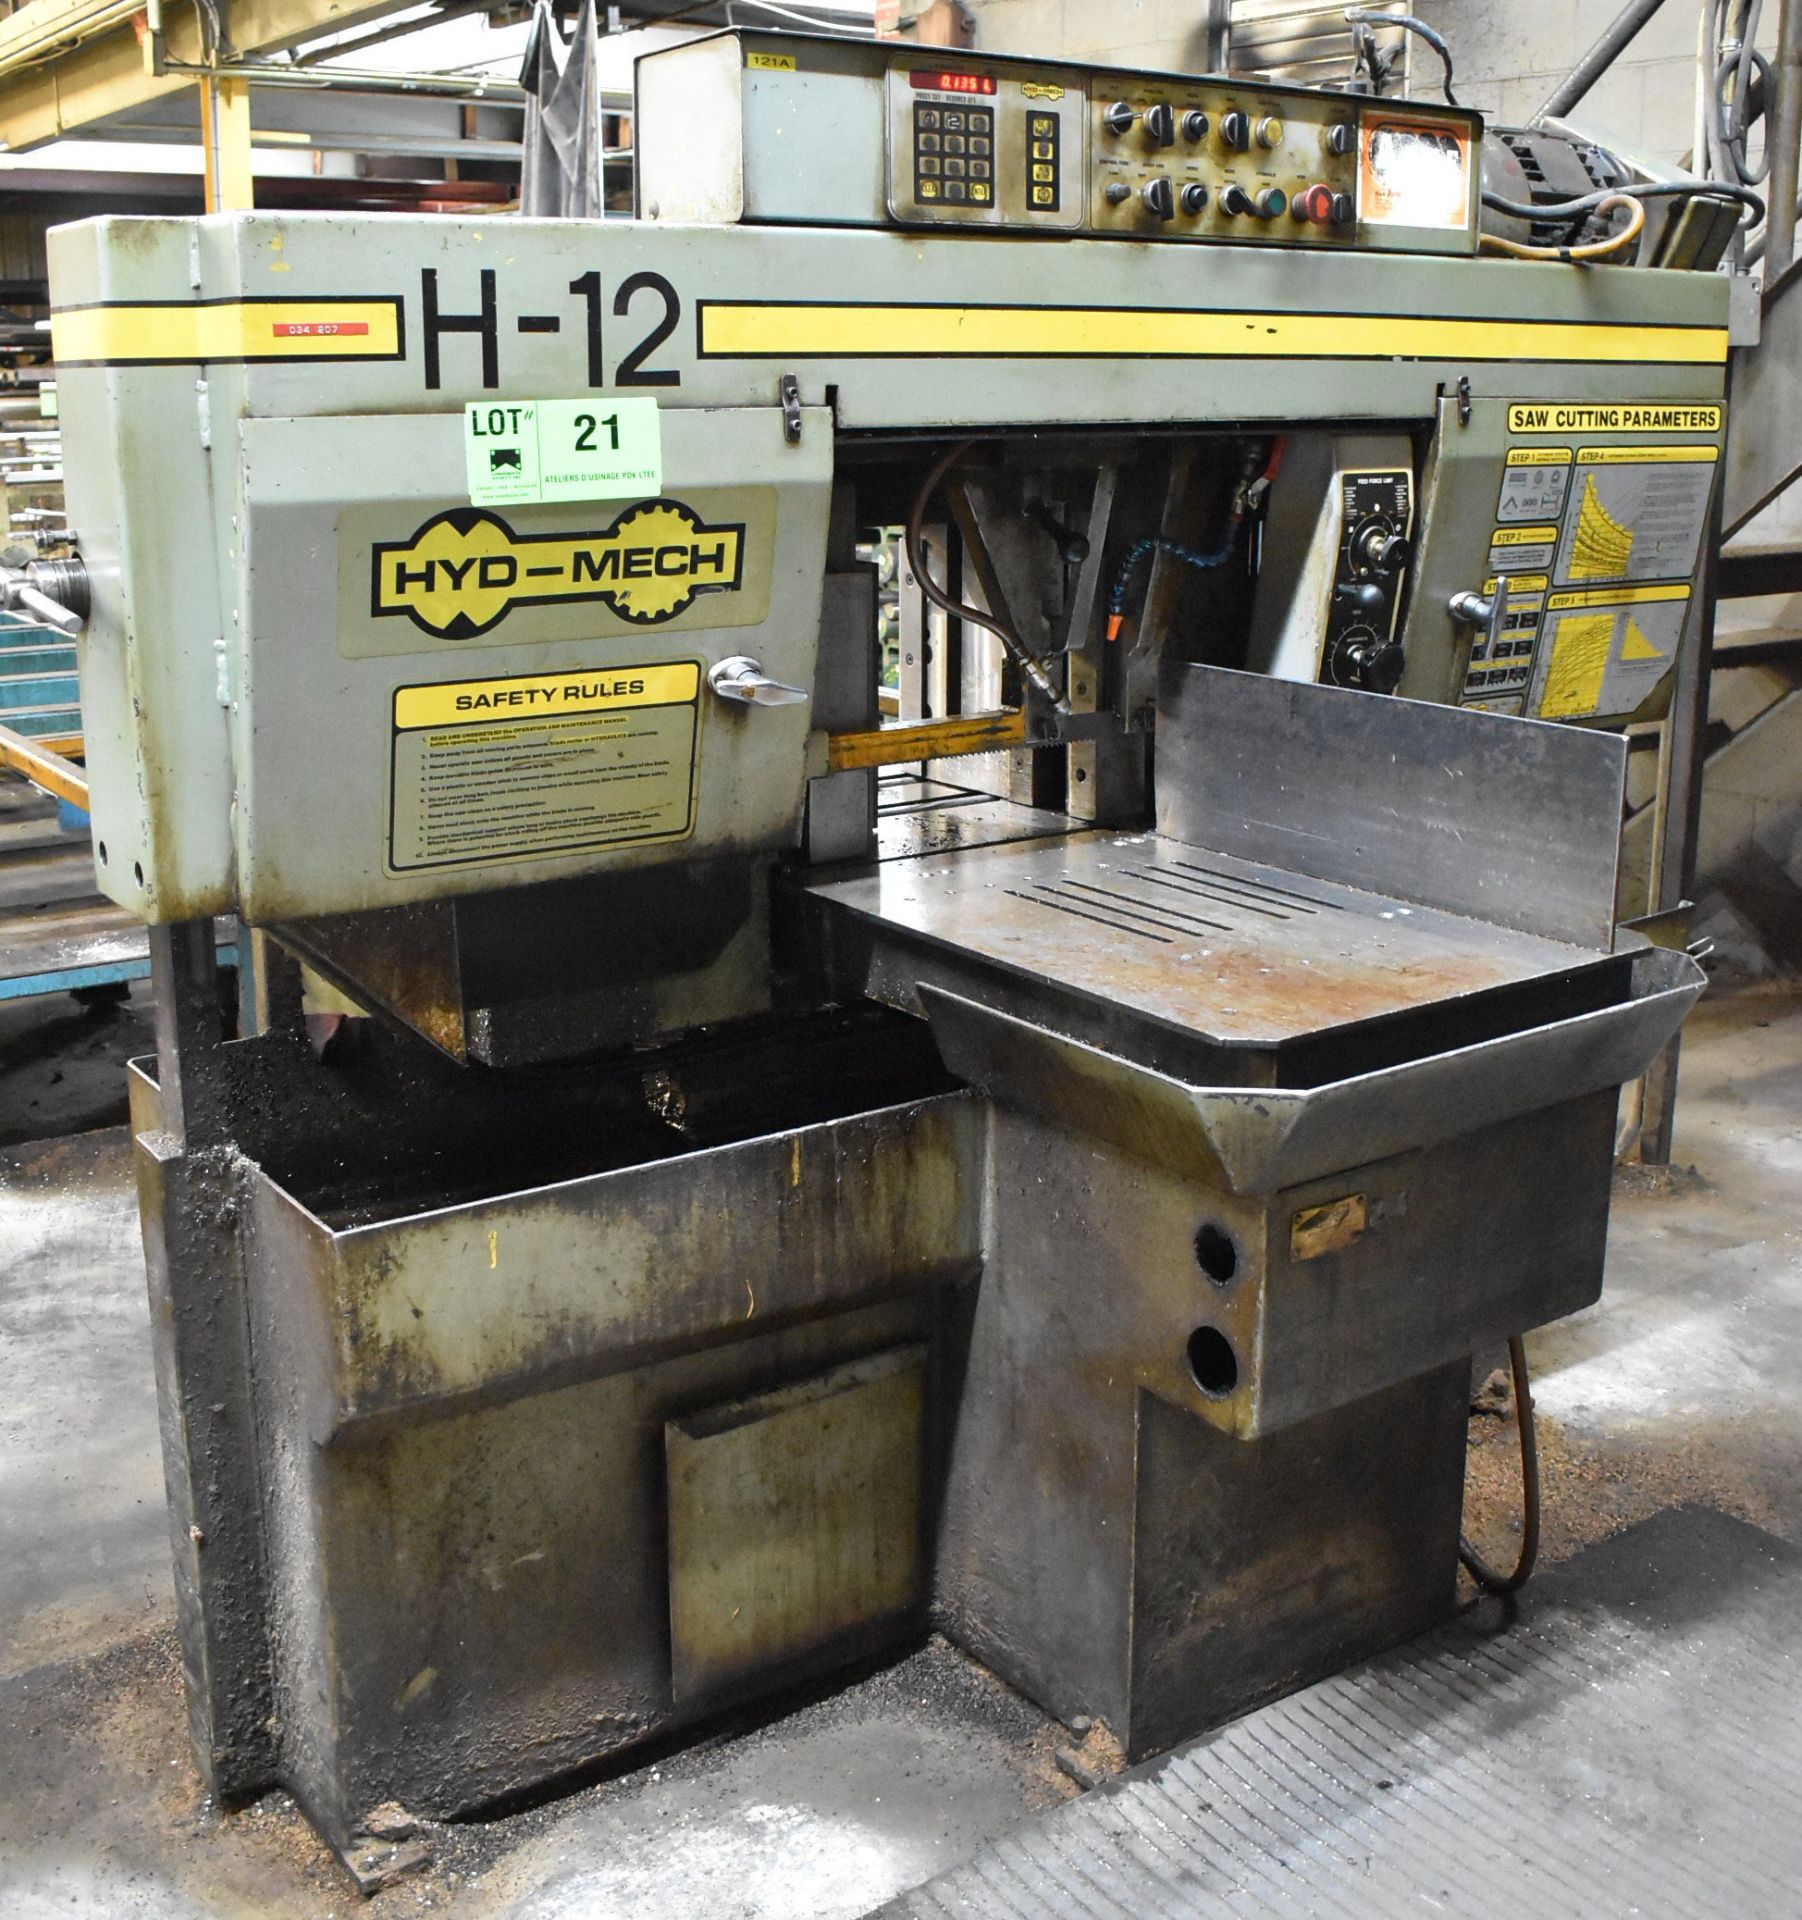 HYD-MECH H-12 AUTOMATIC HORIZONTAL BAND SAW WITH 12"X12" MAX. CUTTING CAPACITY, HYDRAULIC FEED